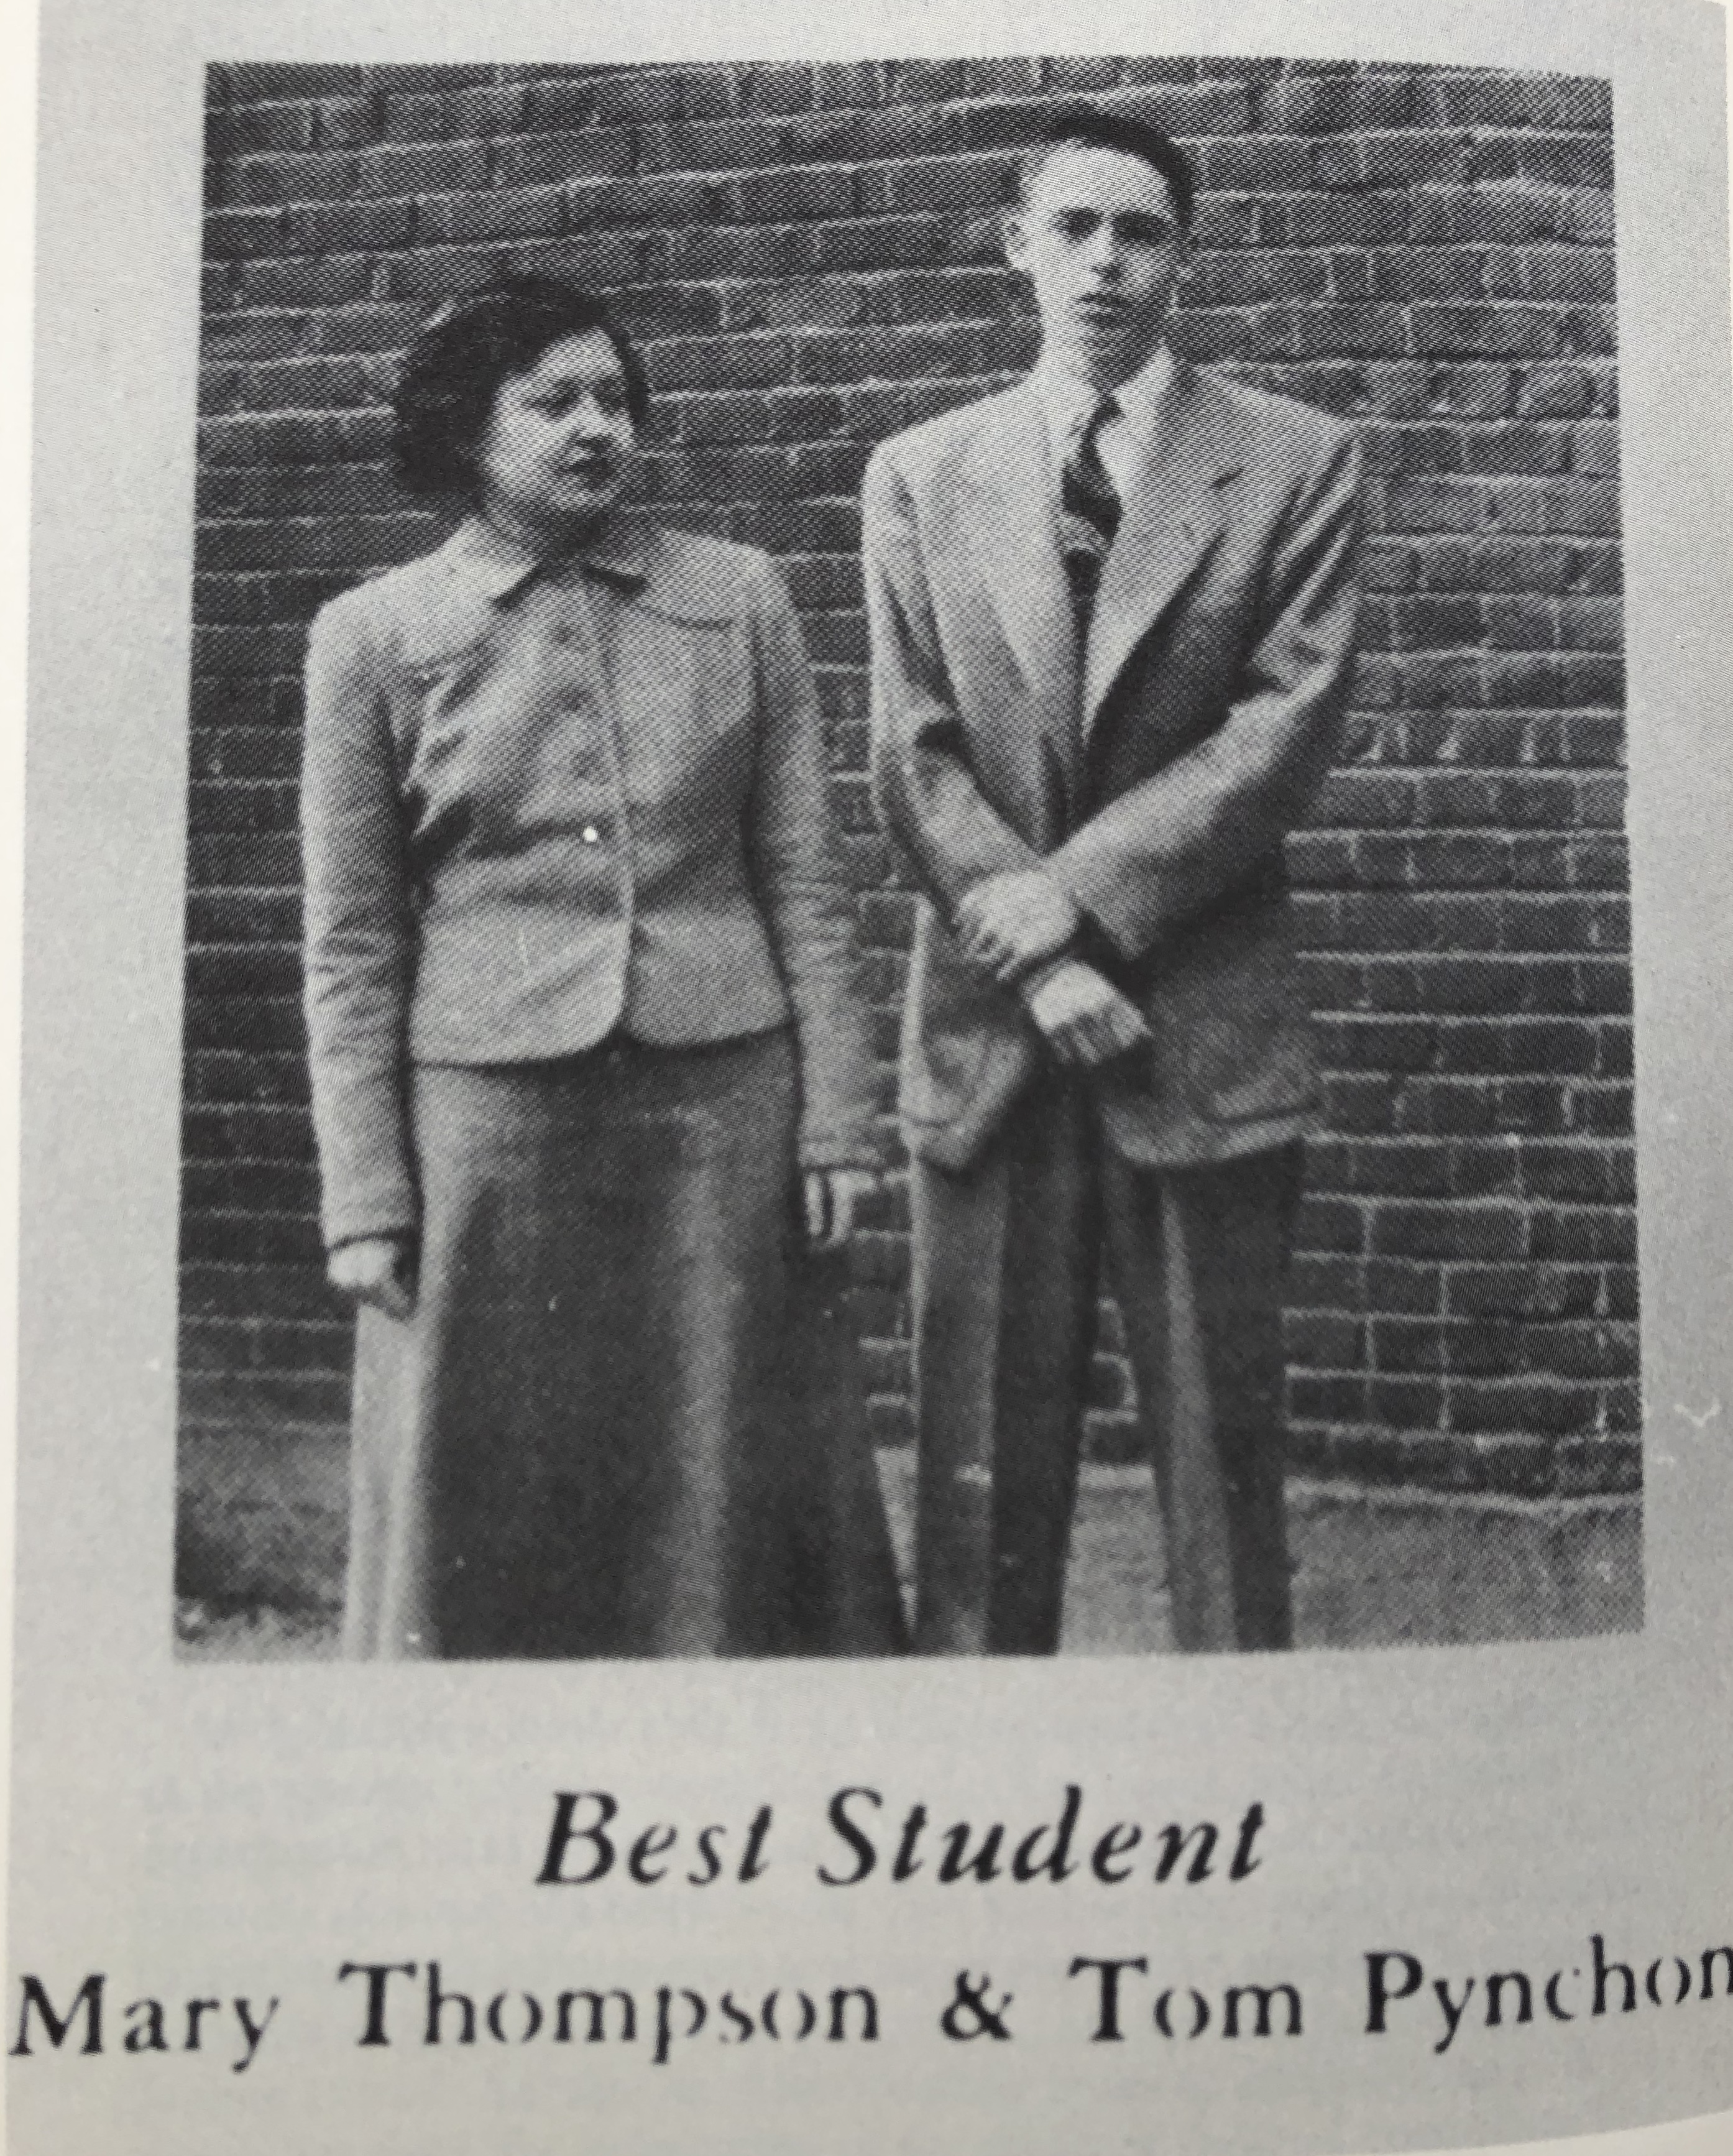 03 Oysterette 1953 - Thomas Pynchon best student